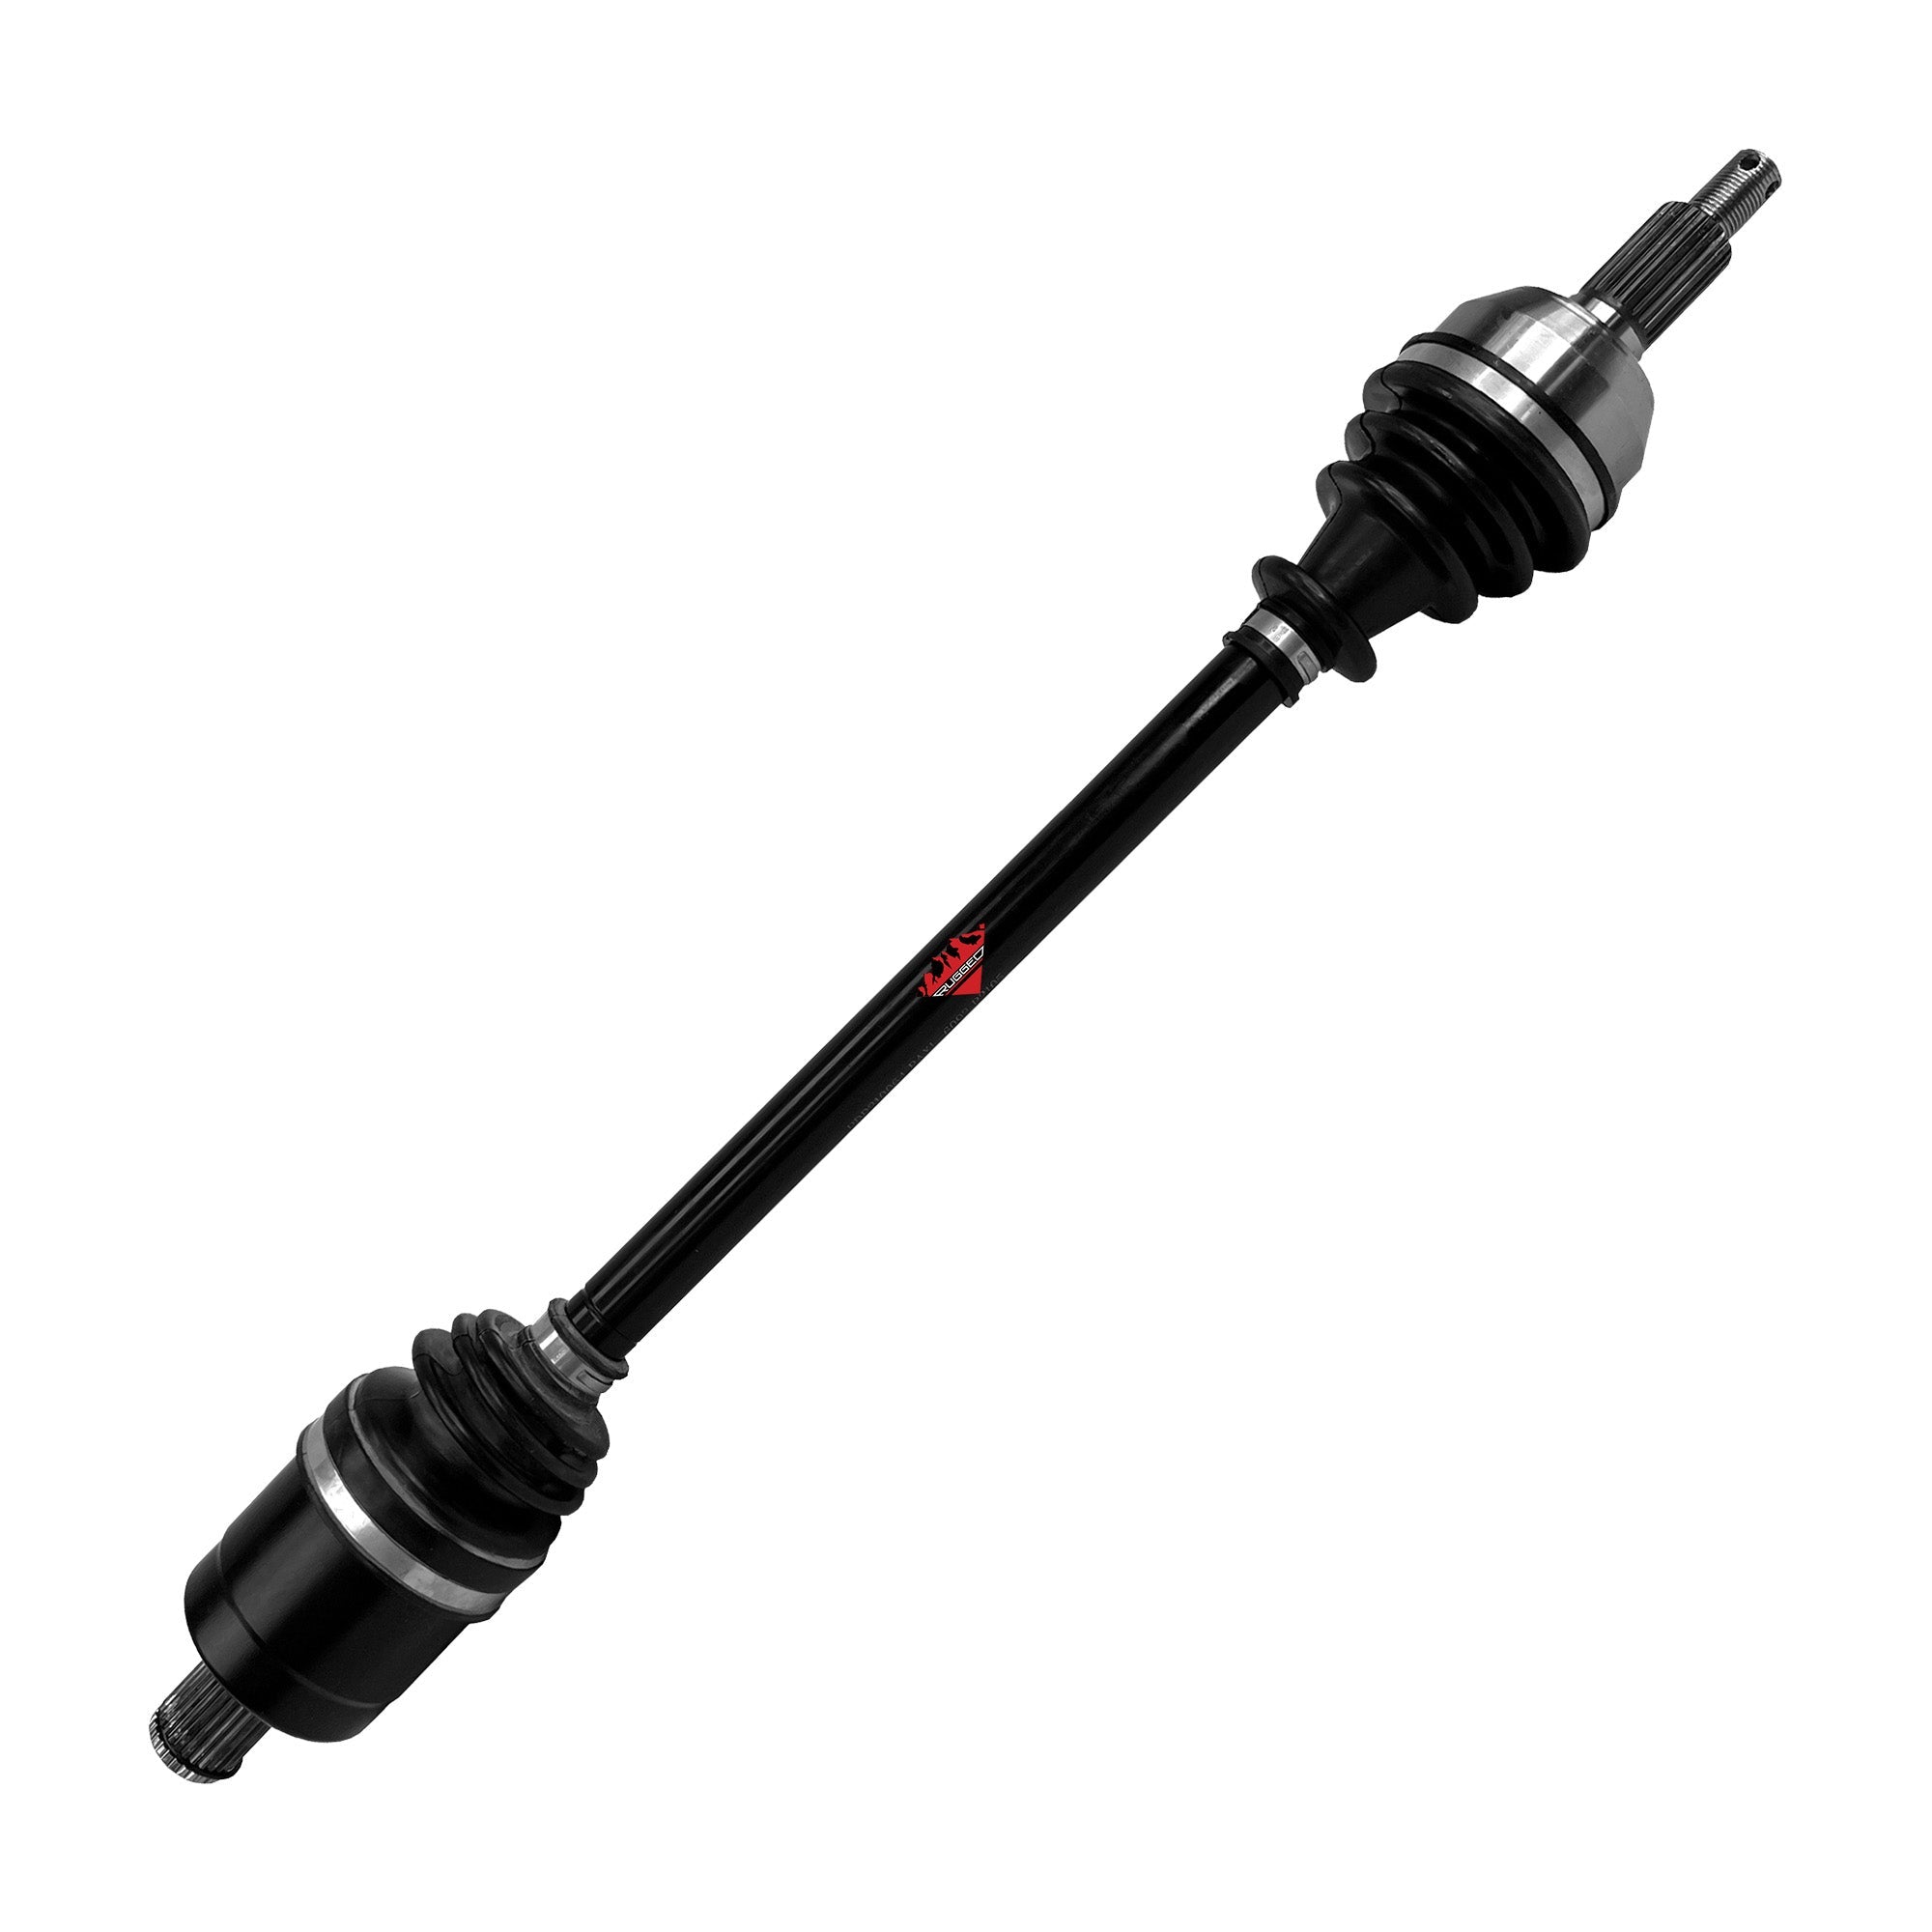 Performance Axle for Coleman Outfitter 700 